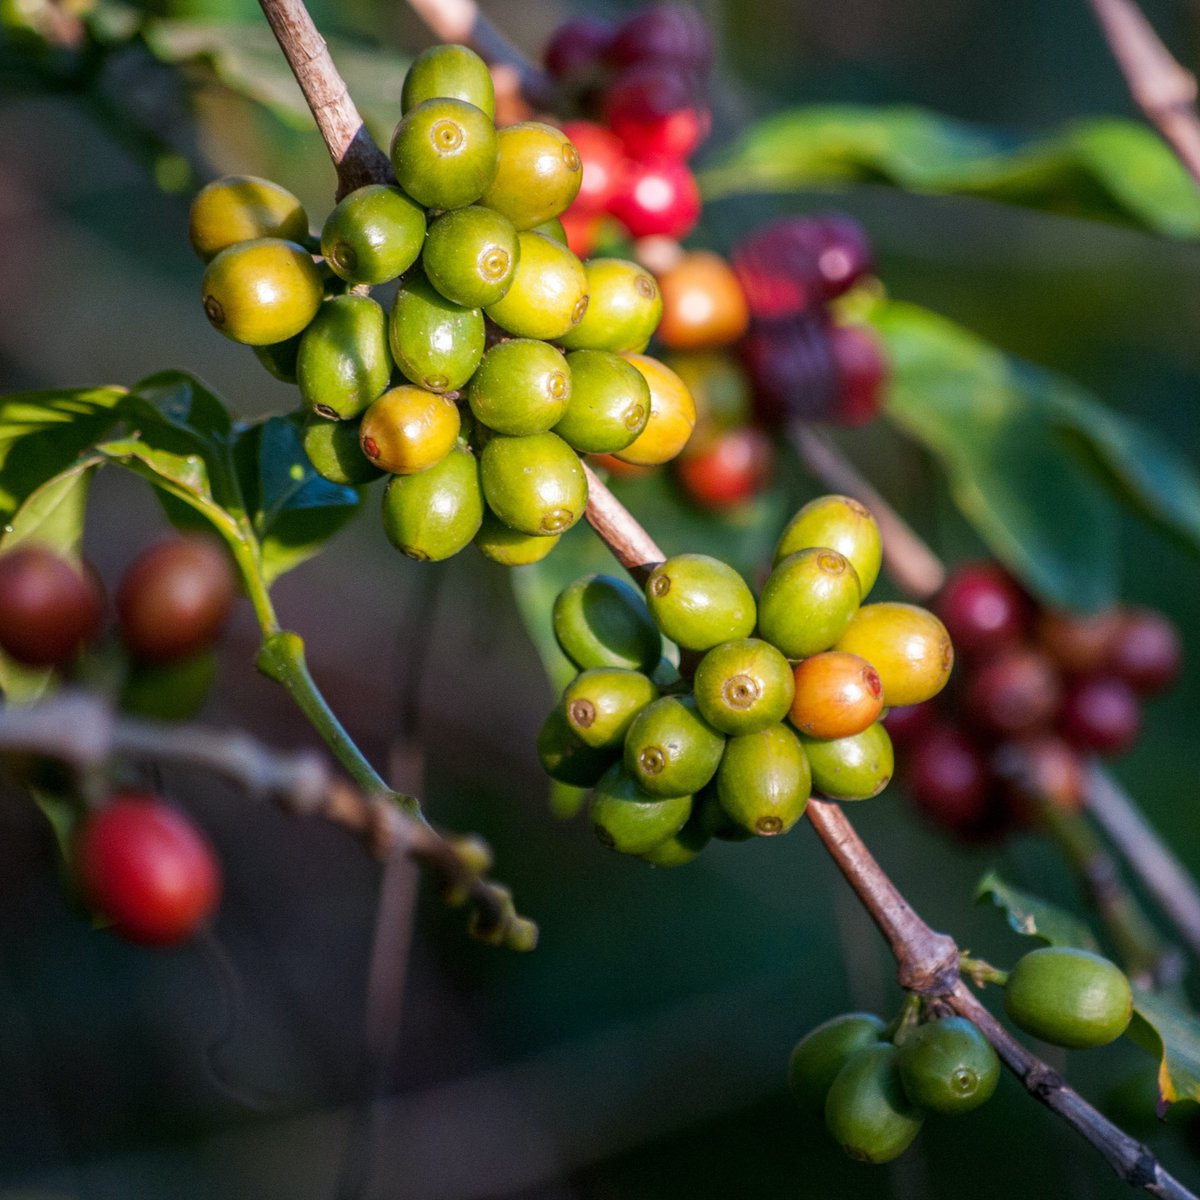 ☕️ Fun fact: The average lifespan of a coffee tree is around 20-30 years, but it takes about 3-4 years for a newly planted coffee tree to produce its first harvest. Patience is truly a virtue when it comes to these delightful beans! 🌱☕️ #CoffeeFacts #BeanJourney #BigBrainCoffee